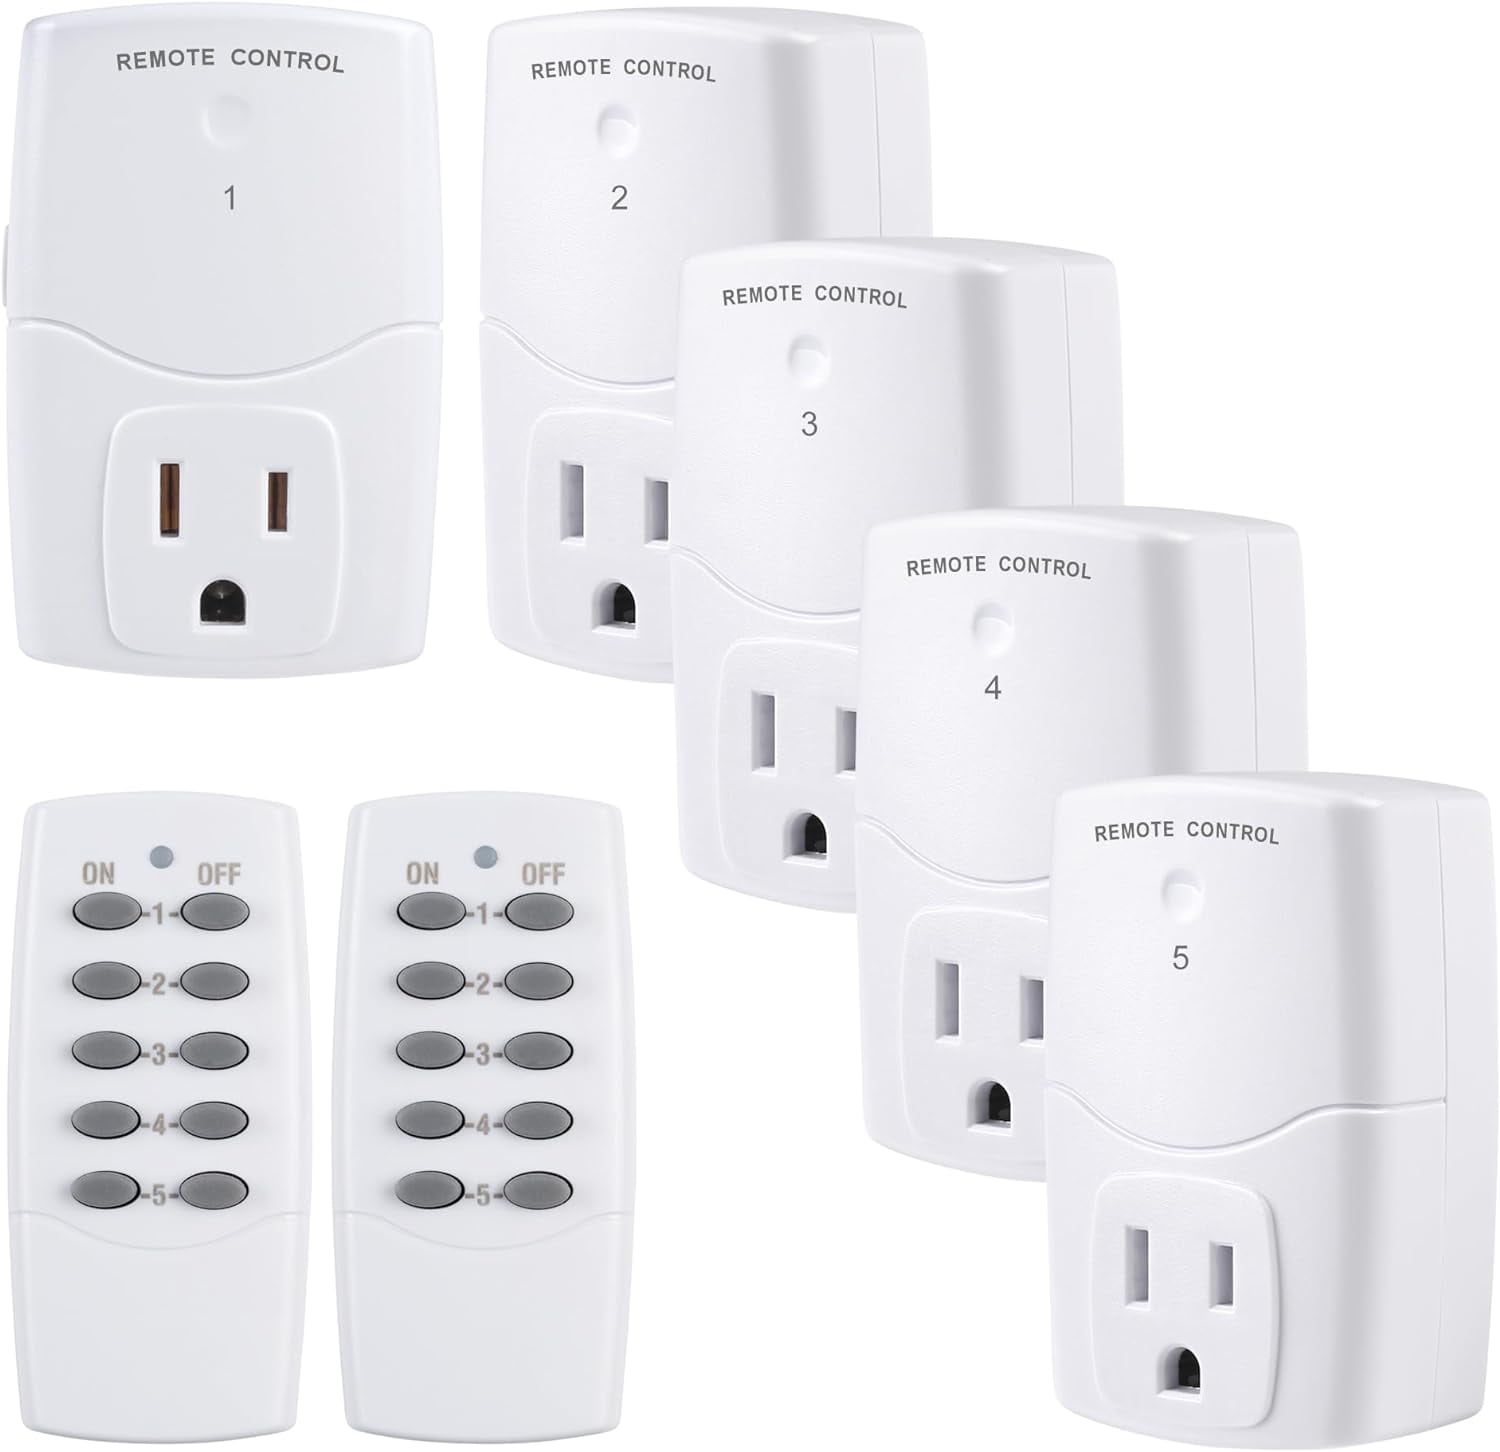 Zoiinet Remote Control Outlet Plug Switch, Buckle Design & Removable  Wireless Light Switch, No Wiring Needed, 300 ft, 10A/1200W, Programmable,  for Household Appliances - Coupon Codes, Promo Codes, Daily Deals, Save  Money